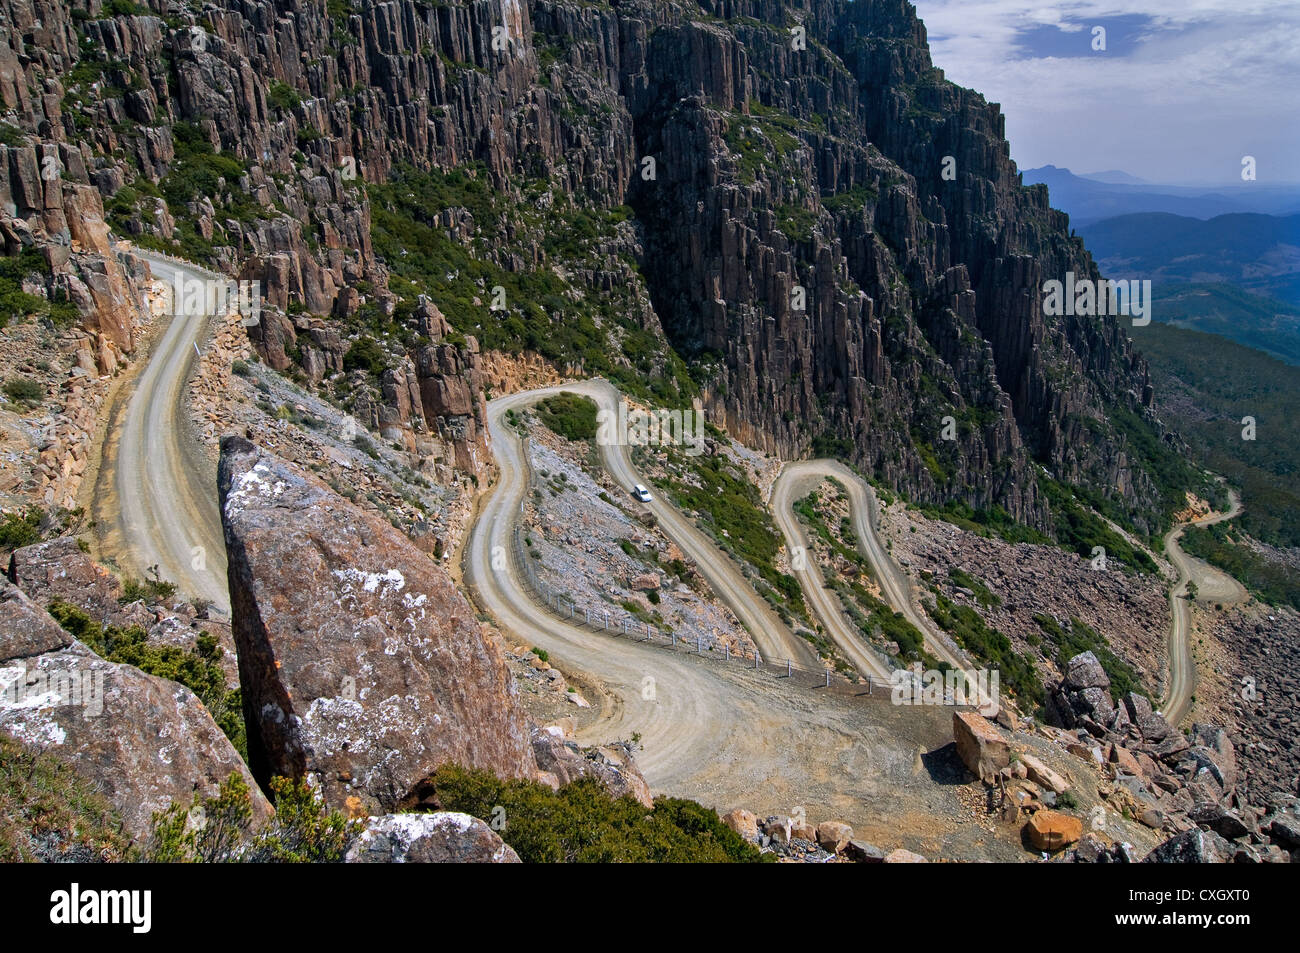 Winding Road called Jacobs Ladder up to Ben Lomond National Park. Stock Photo